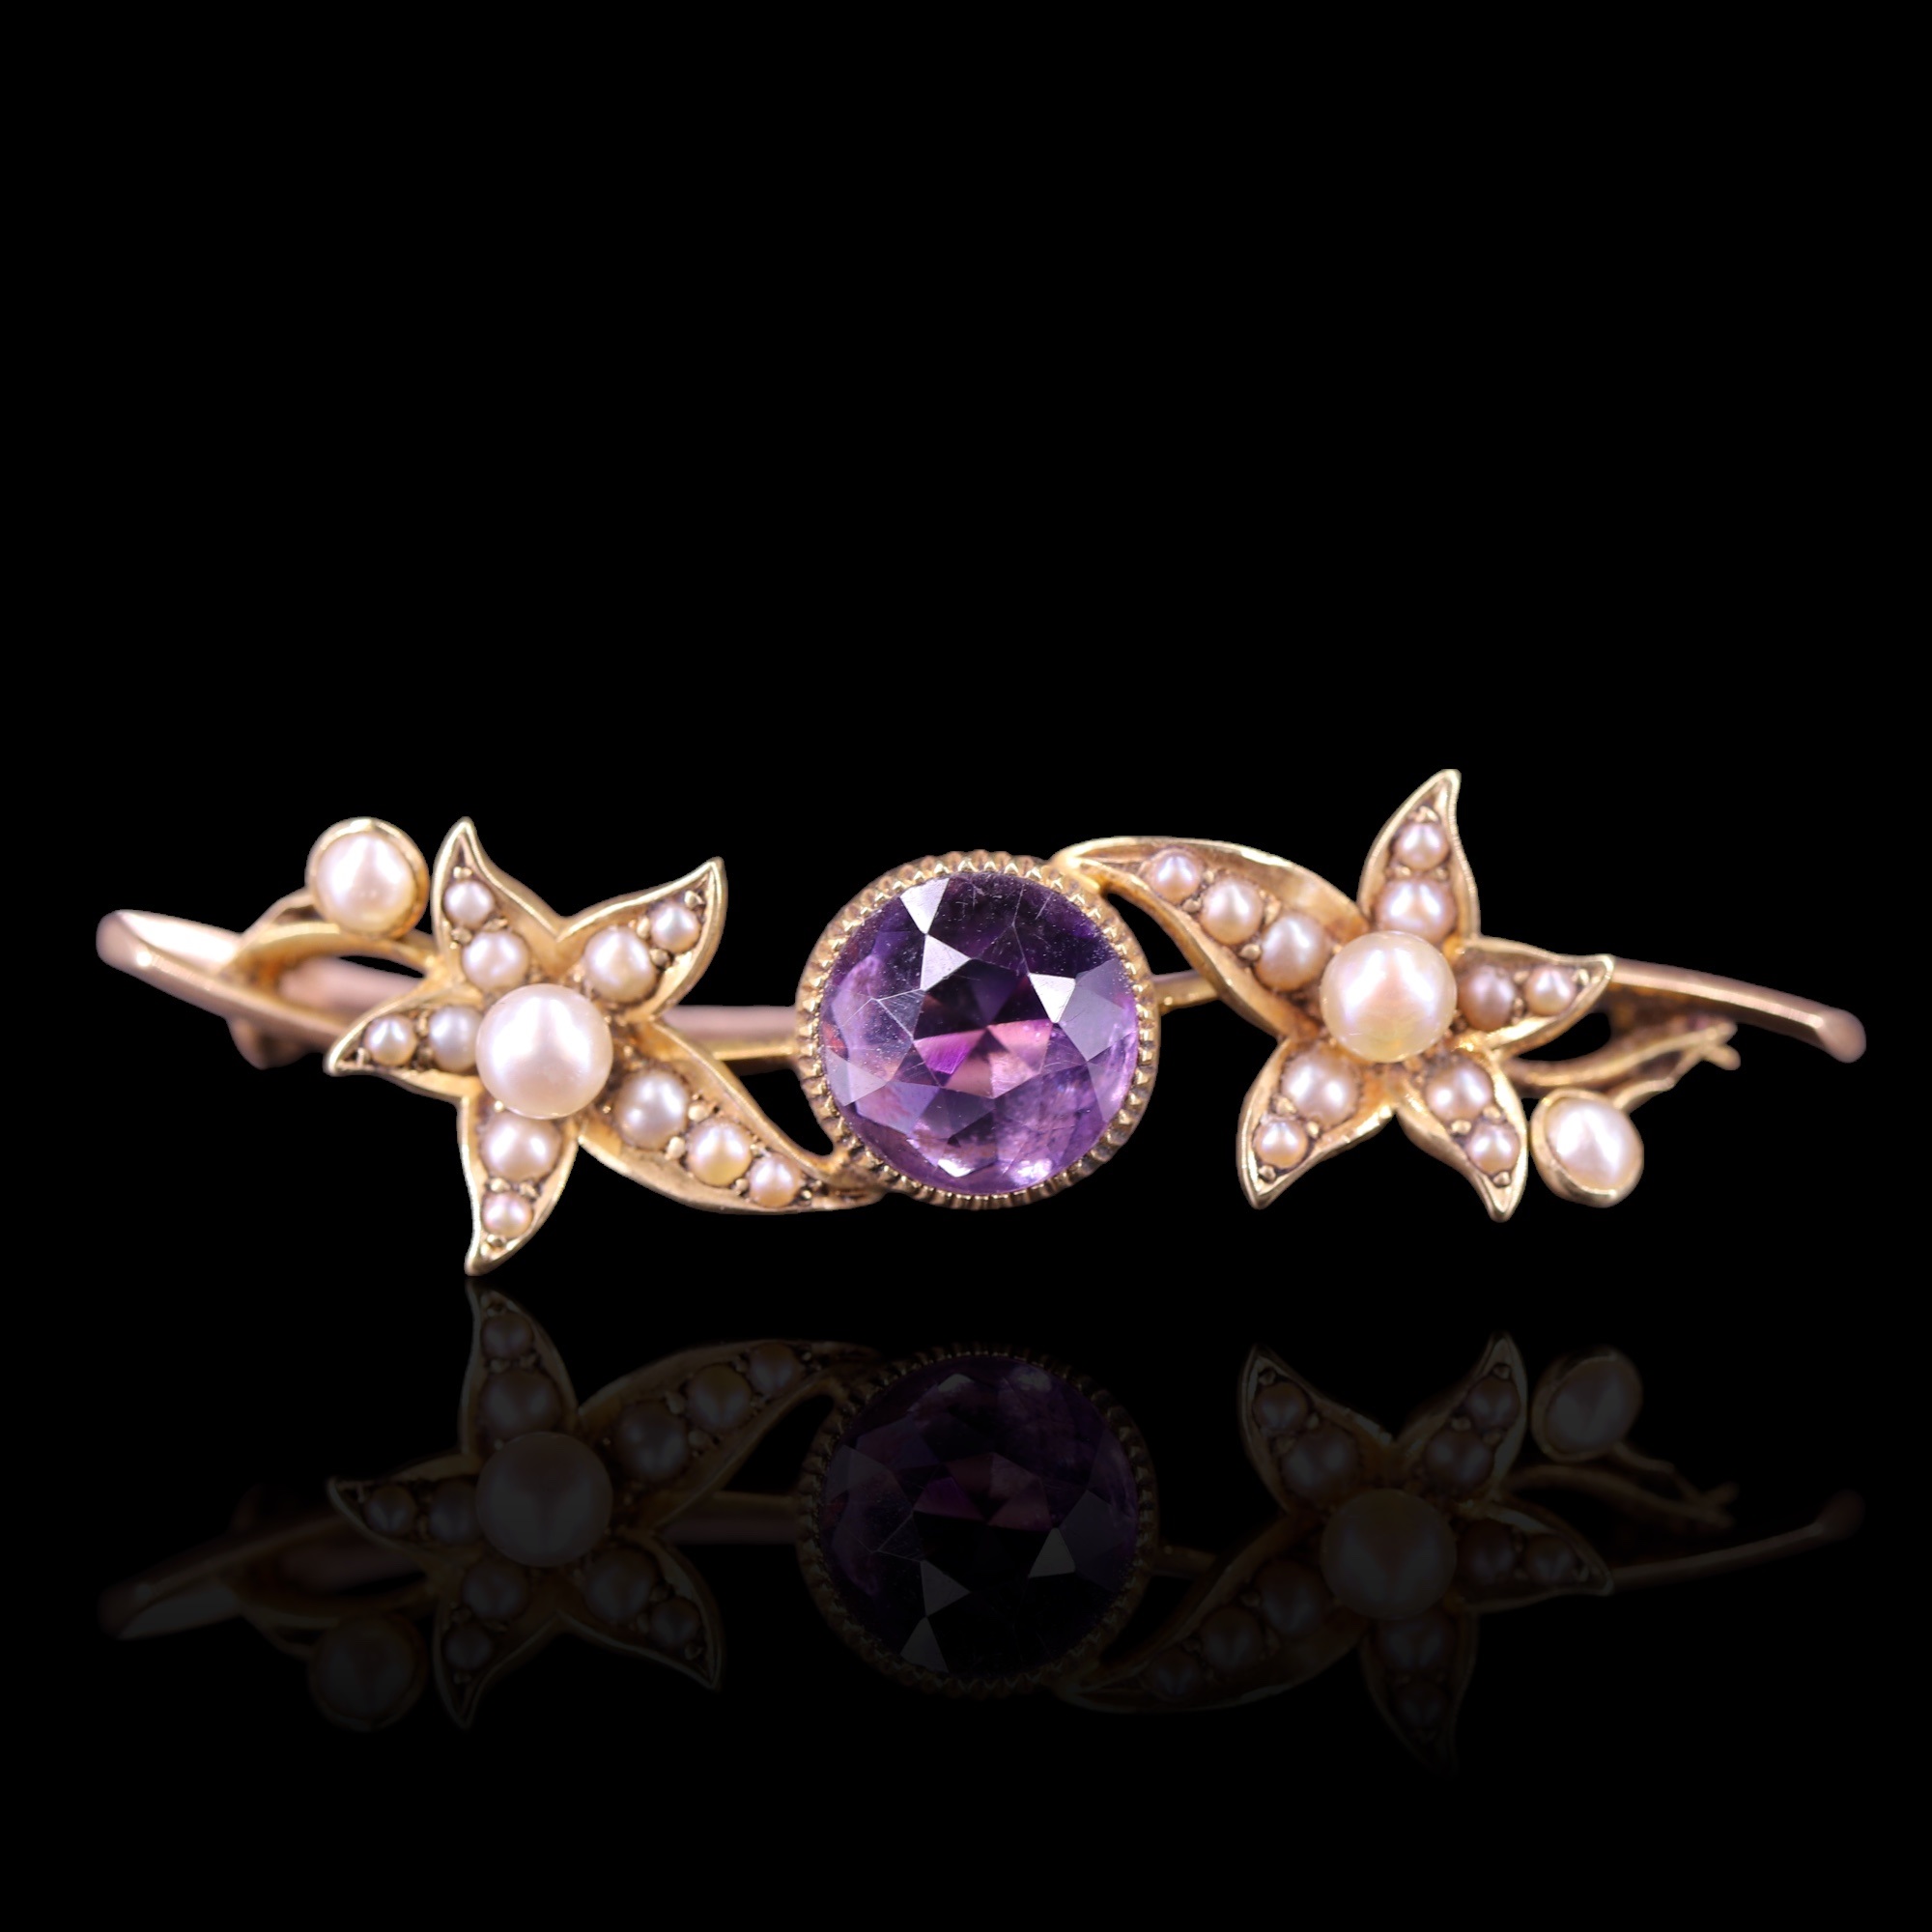 An antique amethyst, seed pearl and 15 ct gold brooch, comprising a central round-cut amethyst of